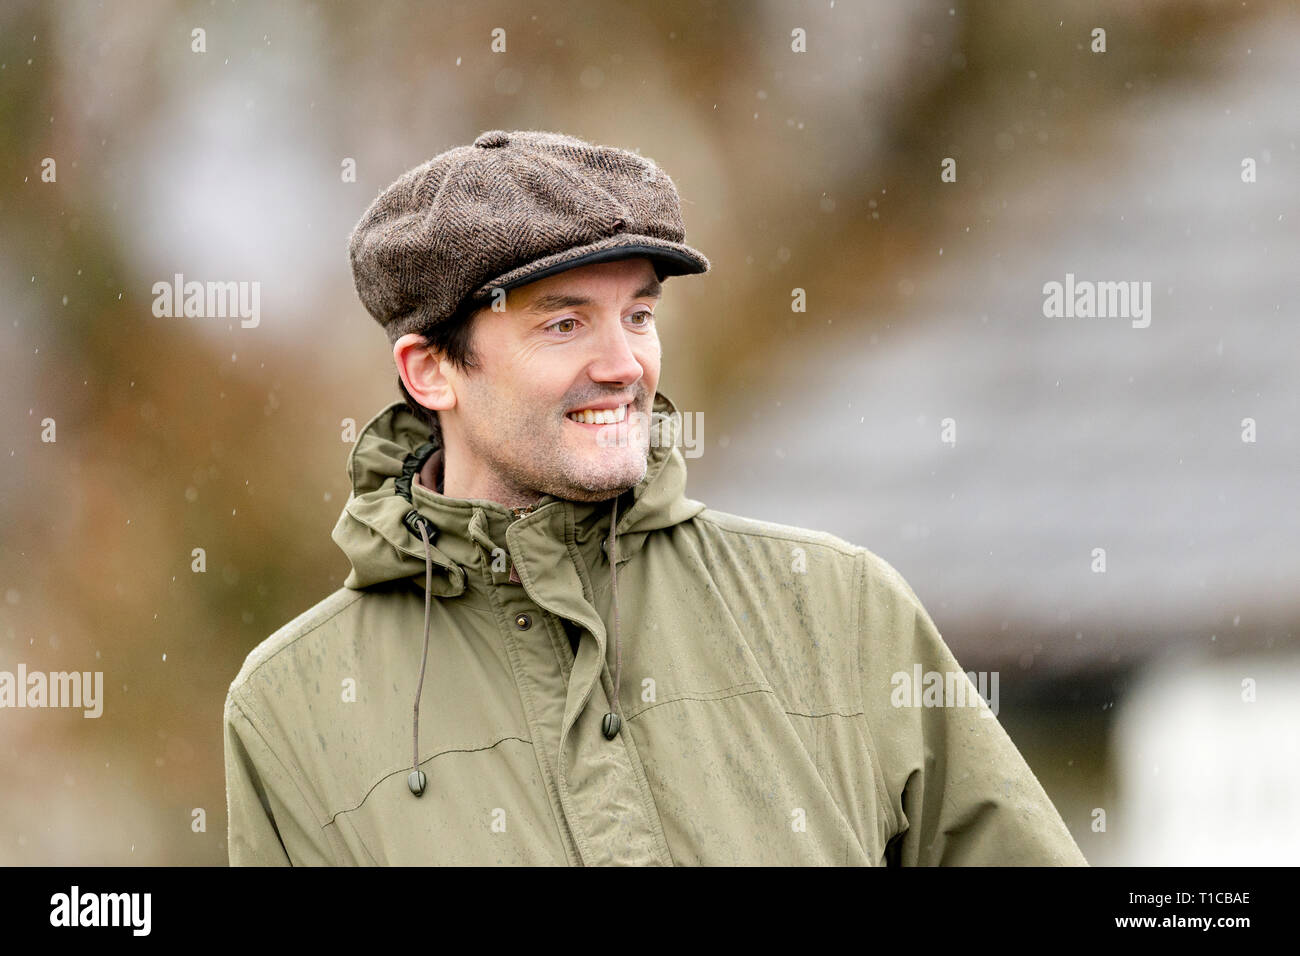 Simon Fraser, 16th Lord Lovat pictured while attending a shinty match at Balgate, Kiltarlity. Stock Photo